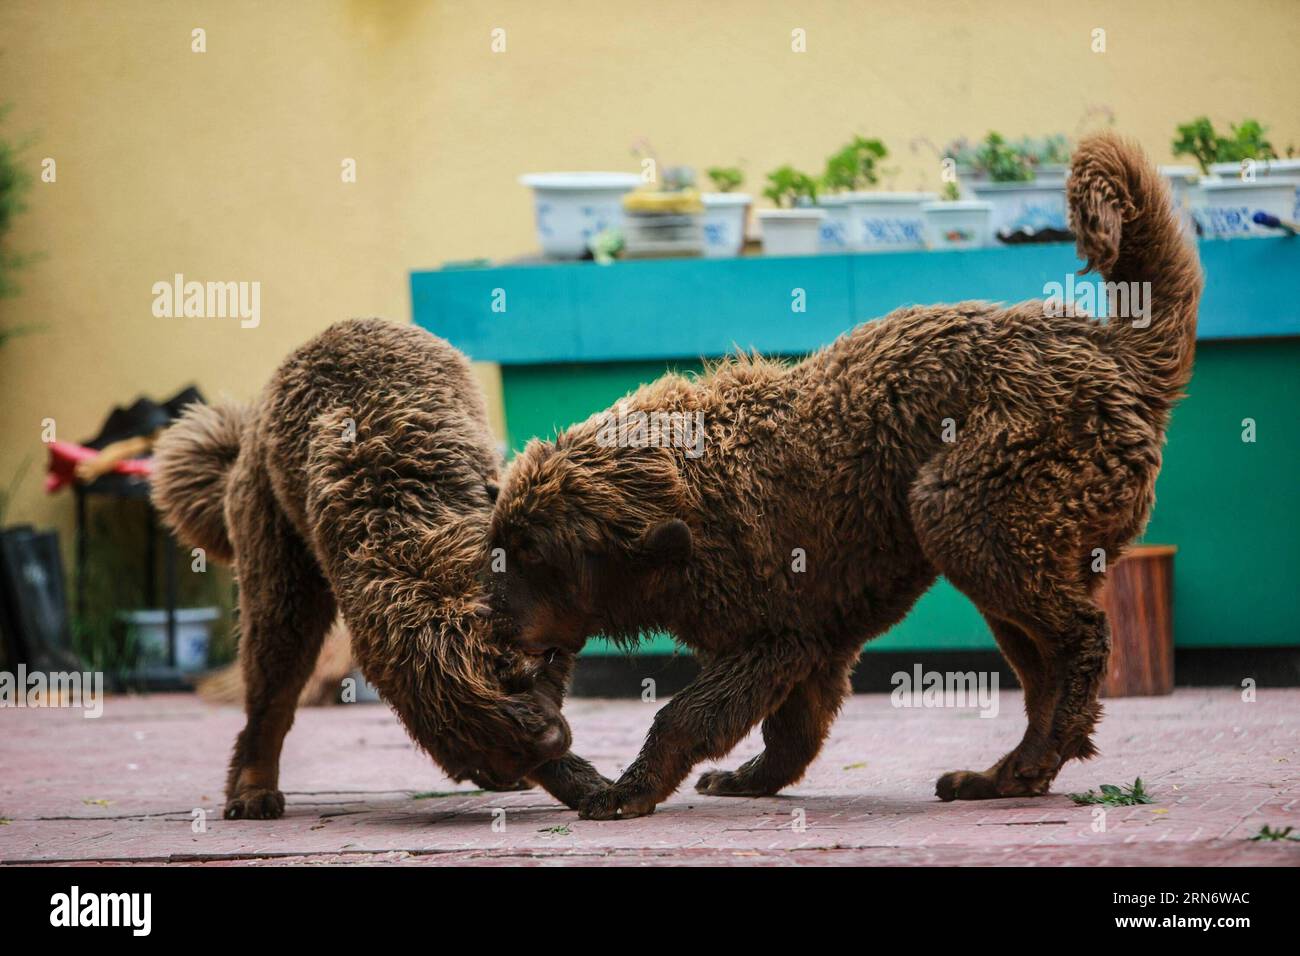 LHASA, Aug. 6, 2015 -- Two 5-month-old Tibetan mastiffs play at a breeding center in Lhasa, capital of southwest China s Tibet Autonomous Region, Aug. 6, 2015. The Tibetan Mastiff is a world famous and typical guardian dog species of Tibet. In recent years, due to market disorder and cross breeding, the price of Tibetan mastiffs fell sharply. However, with the aim to maintain the pure blood of the creature, a breeding center was jointly established with local farming science departments in Lhasa in 2015. So far, 15 pure-blood heritage Tibetan mastiffs were raised at the breeding center. )(wyo) Stock Photo